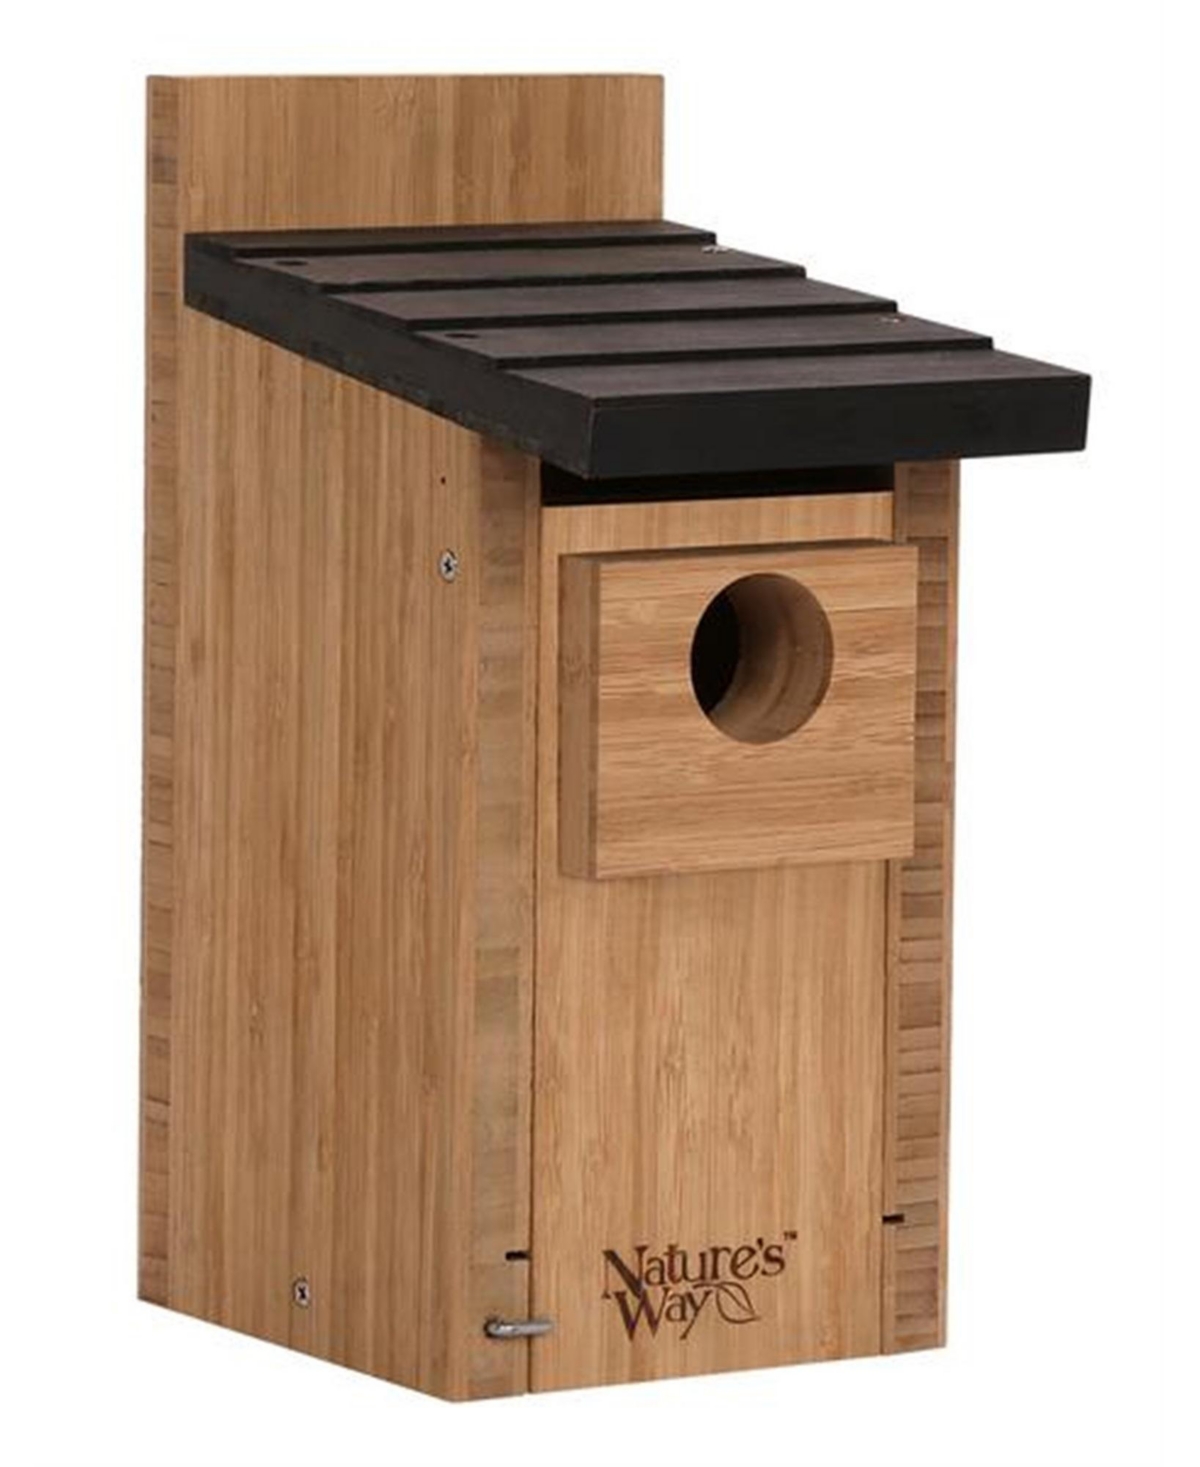 Natures Way CWH3 Bird Products CWH3 Cedar Bluebird Box House - Multi